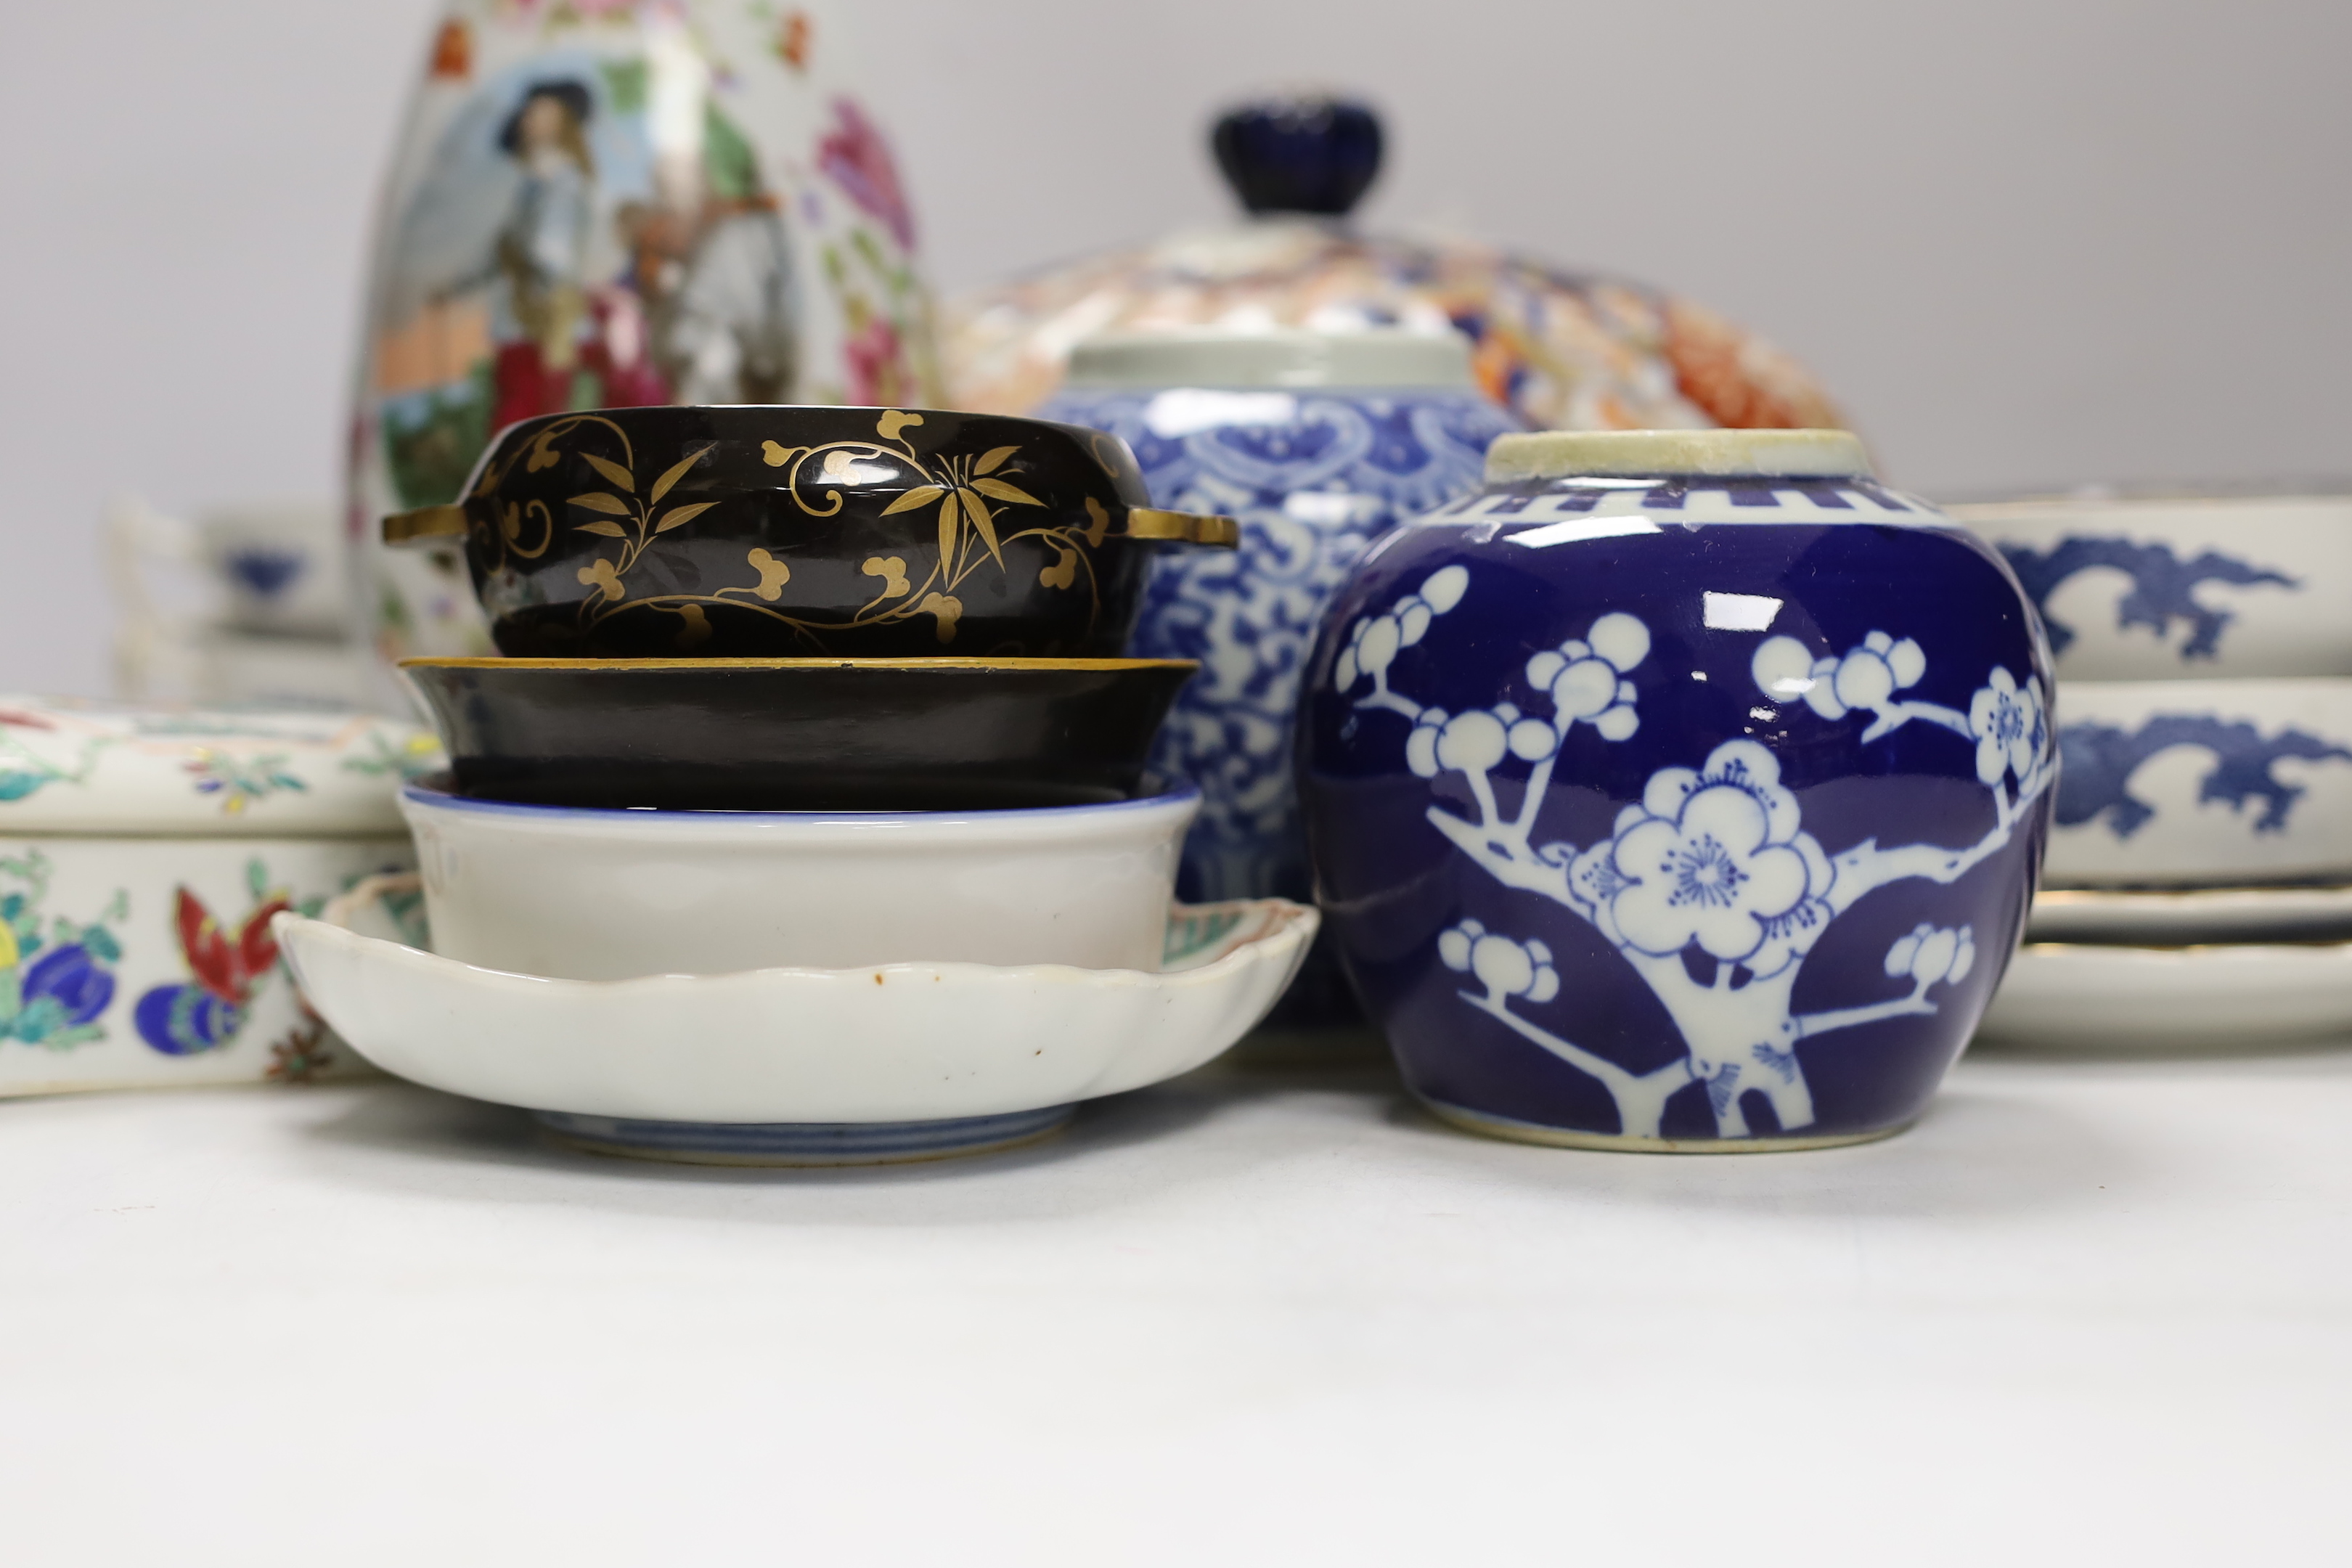 A 19th century Japanese Imari box and cover together with other Japanese, Chinese and European ceramics, largest 25cm